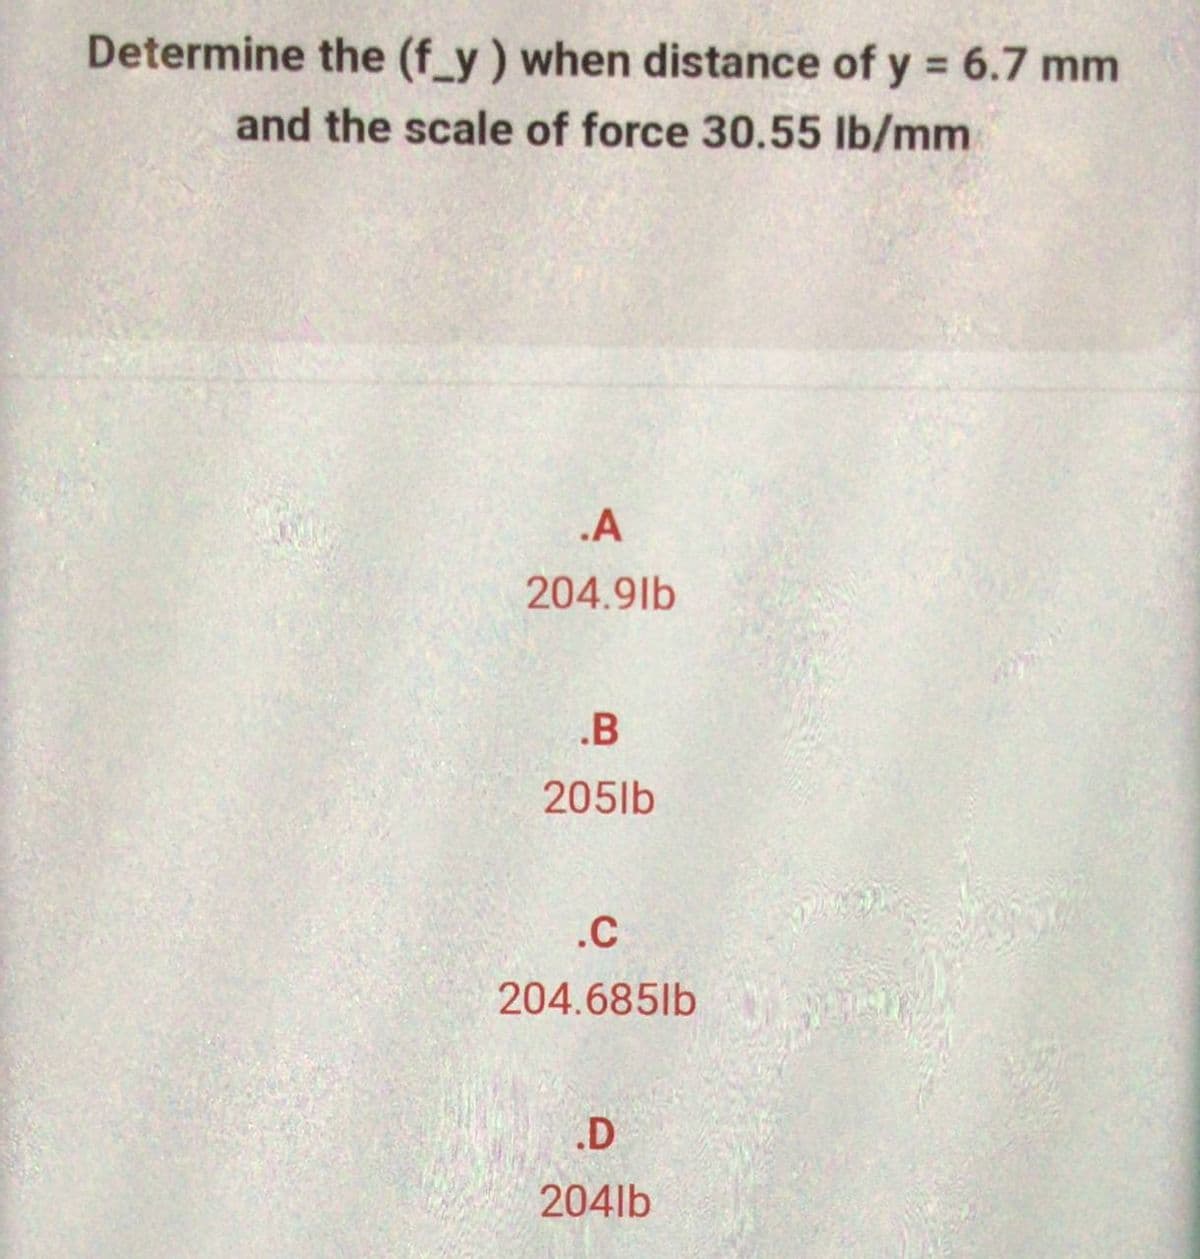 Determine the (f_y) when distance of y = 6.7 mm
and the scale of force 30.55 lb/mm
.A
204.9lb
.B
205lb
.C
204.685lb
.D
204lb